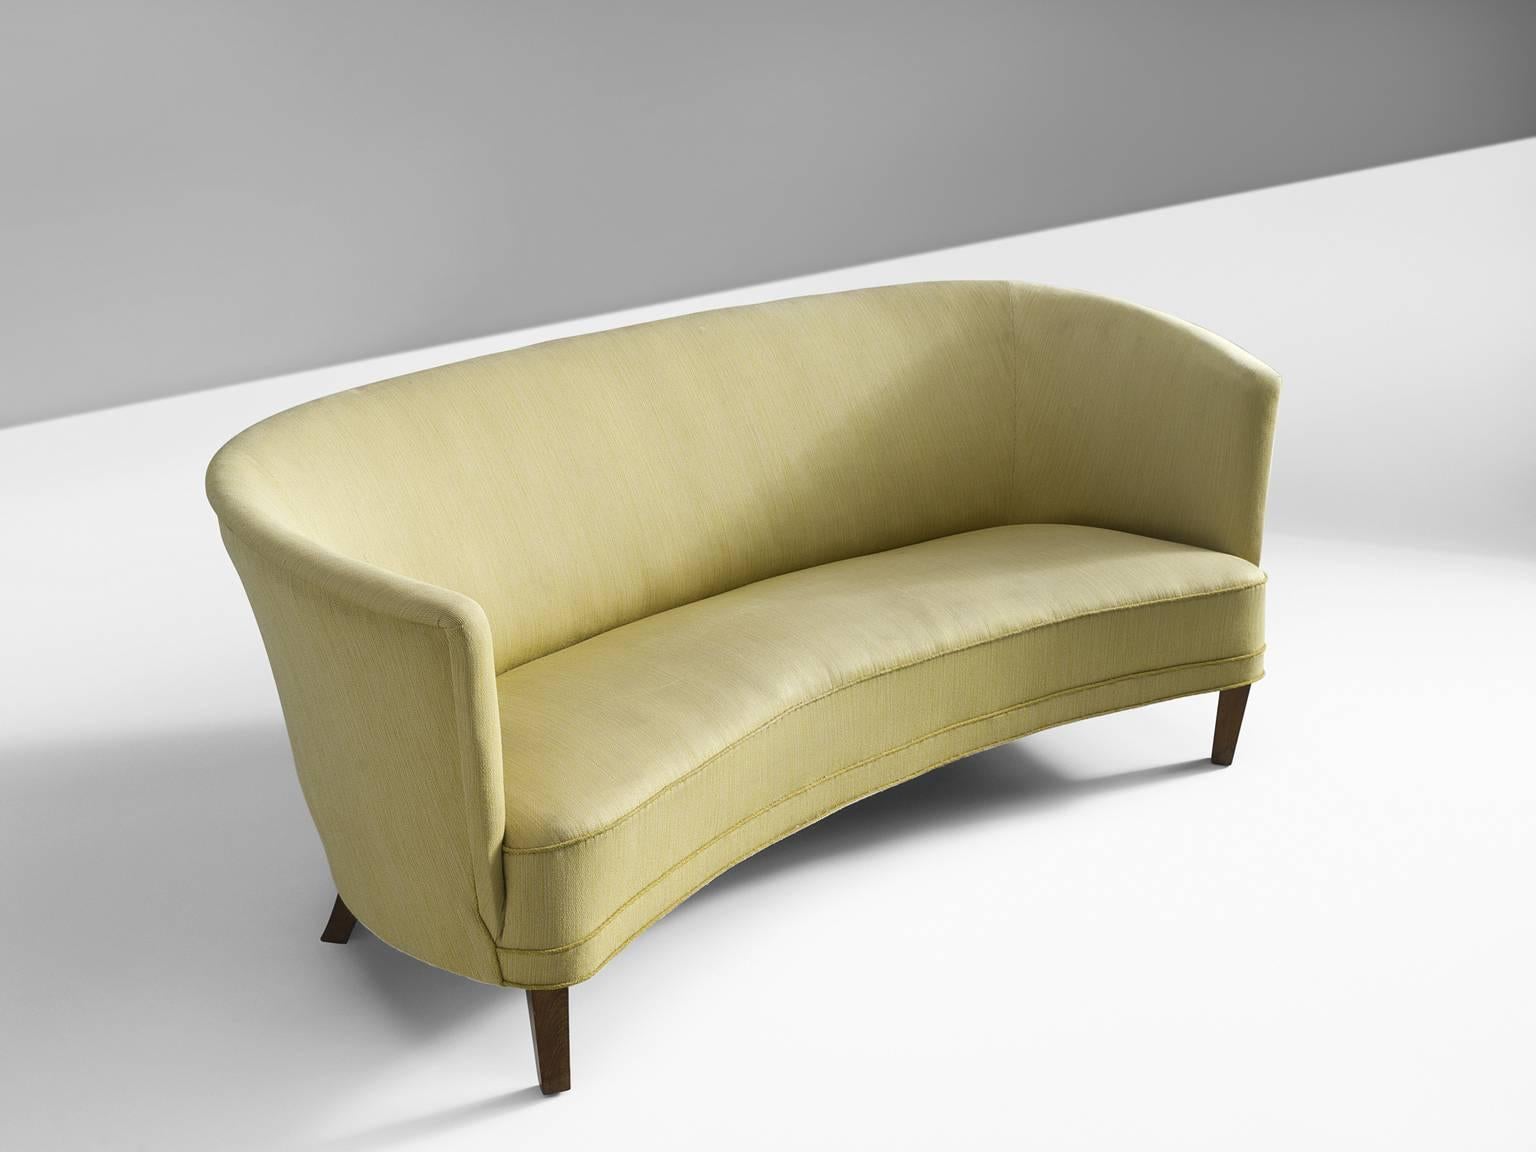 Sofa, fabric and wood, Denmark, 1950s.

Simplistic Swedish sofa with clean lines and a high back. The sofa features small tapered wooden legs. The seat is thick and comfortable and is finished with piping. The high back embraces the sitter in